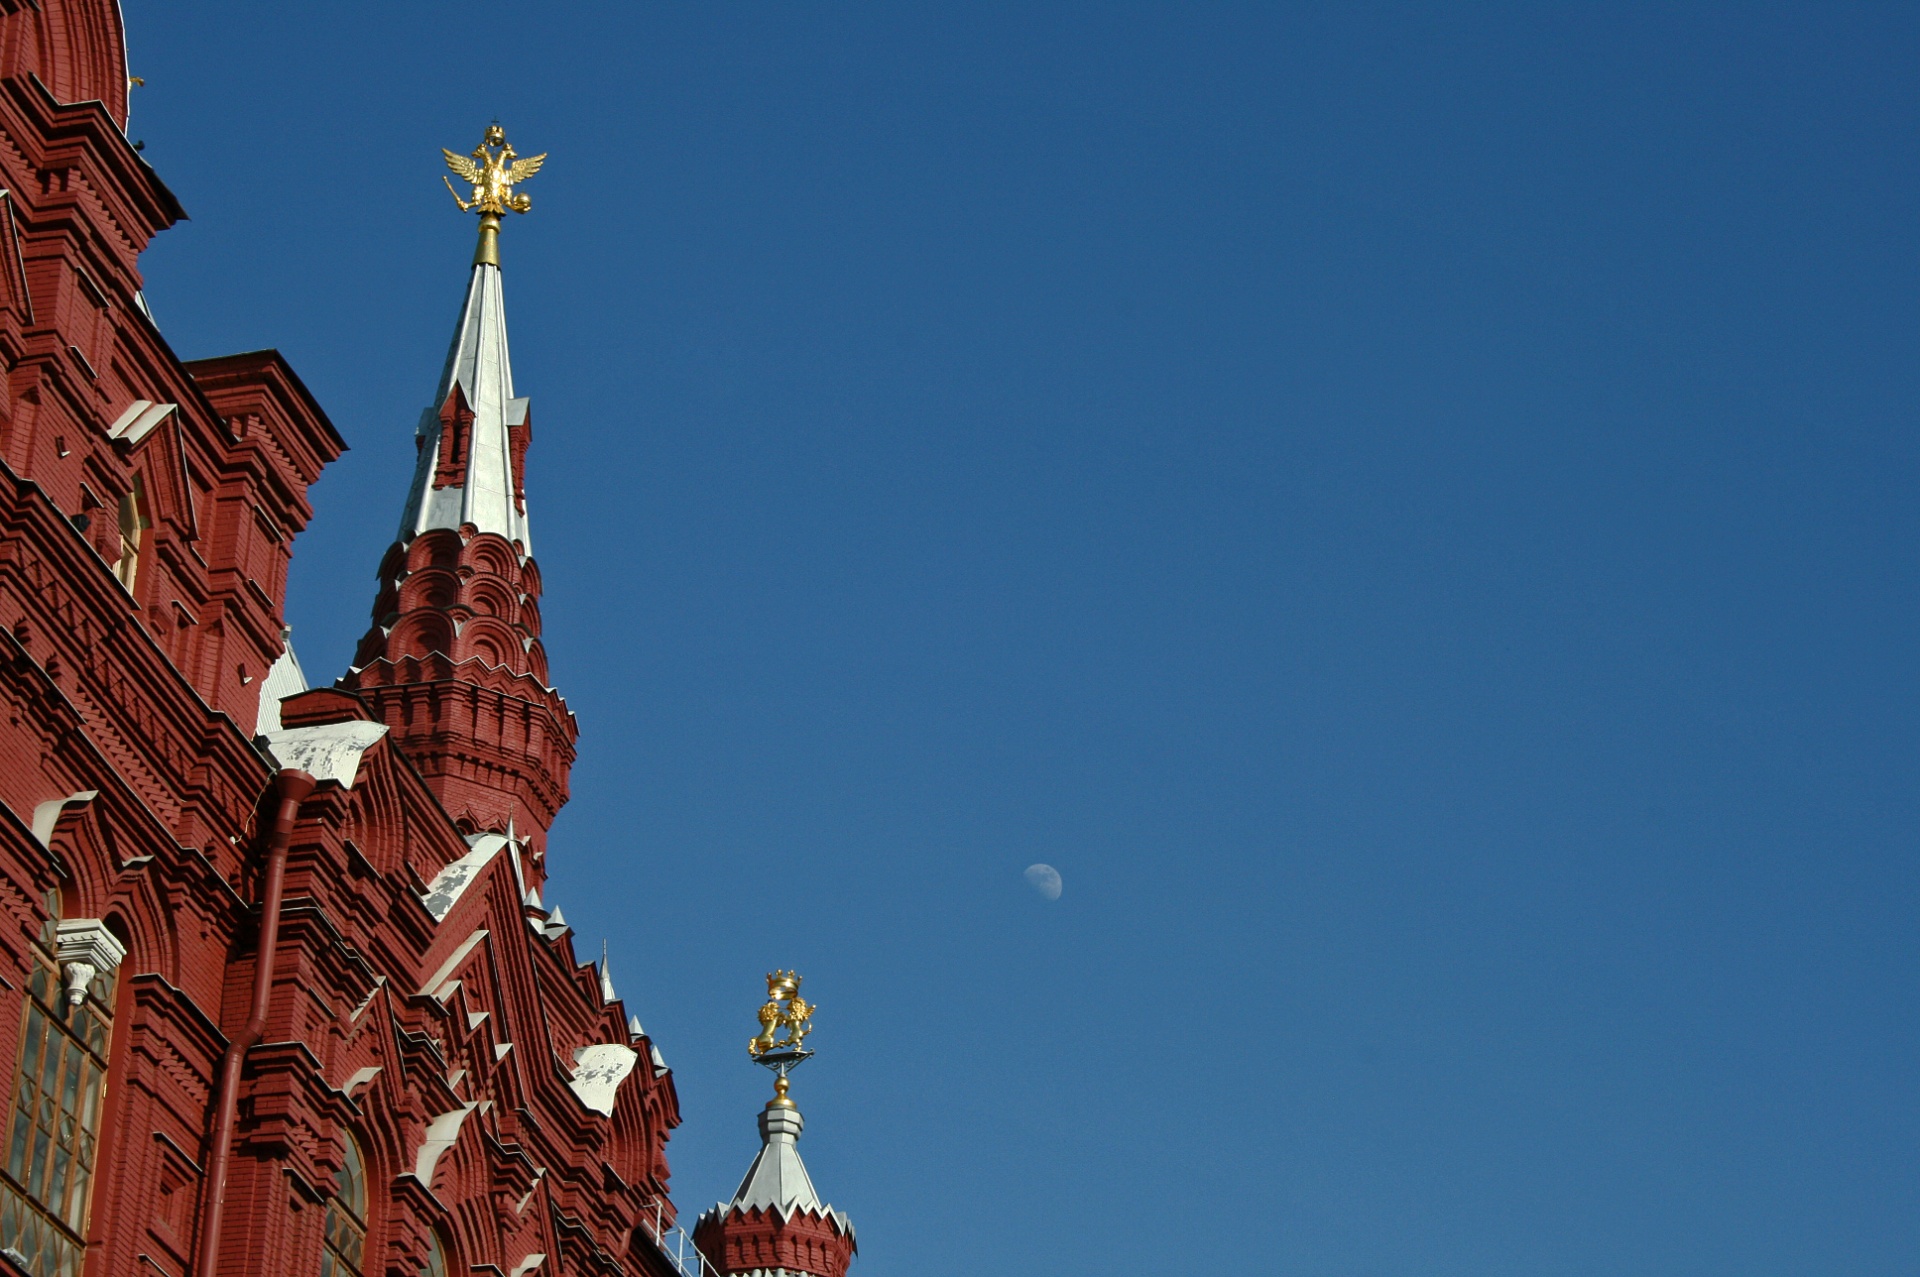 state history museum on red square with partial moon in blue sky in daytime, moscow